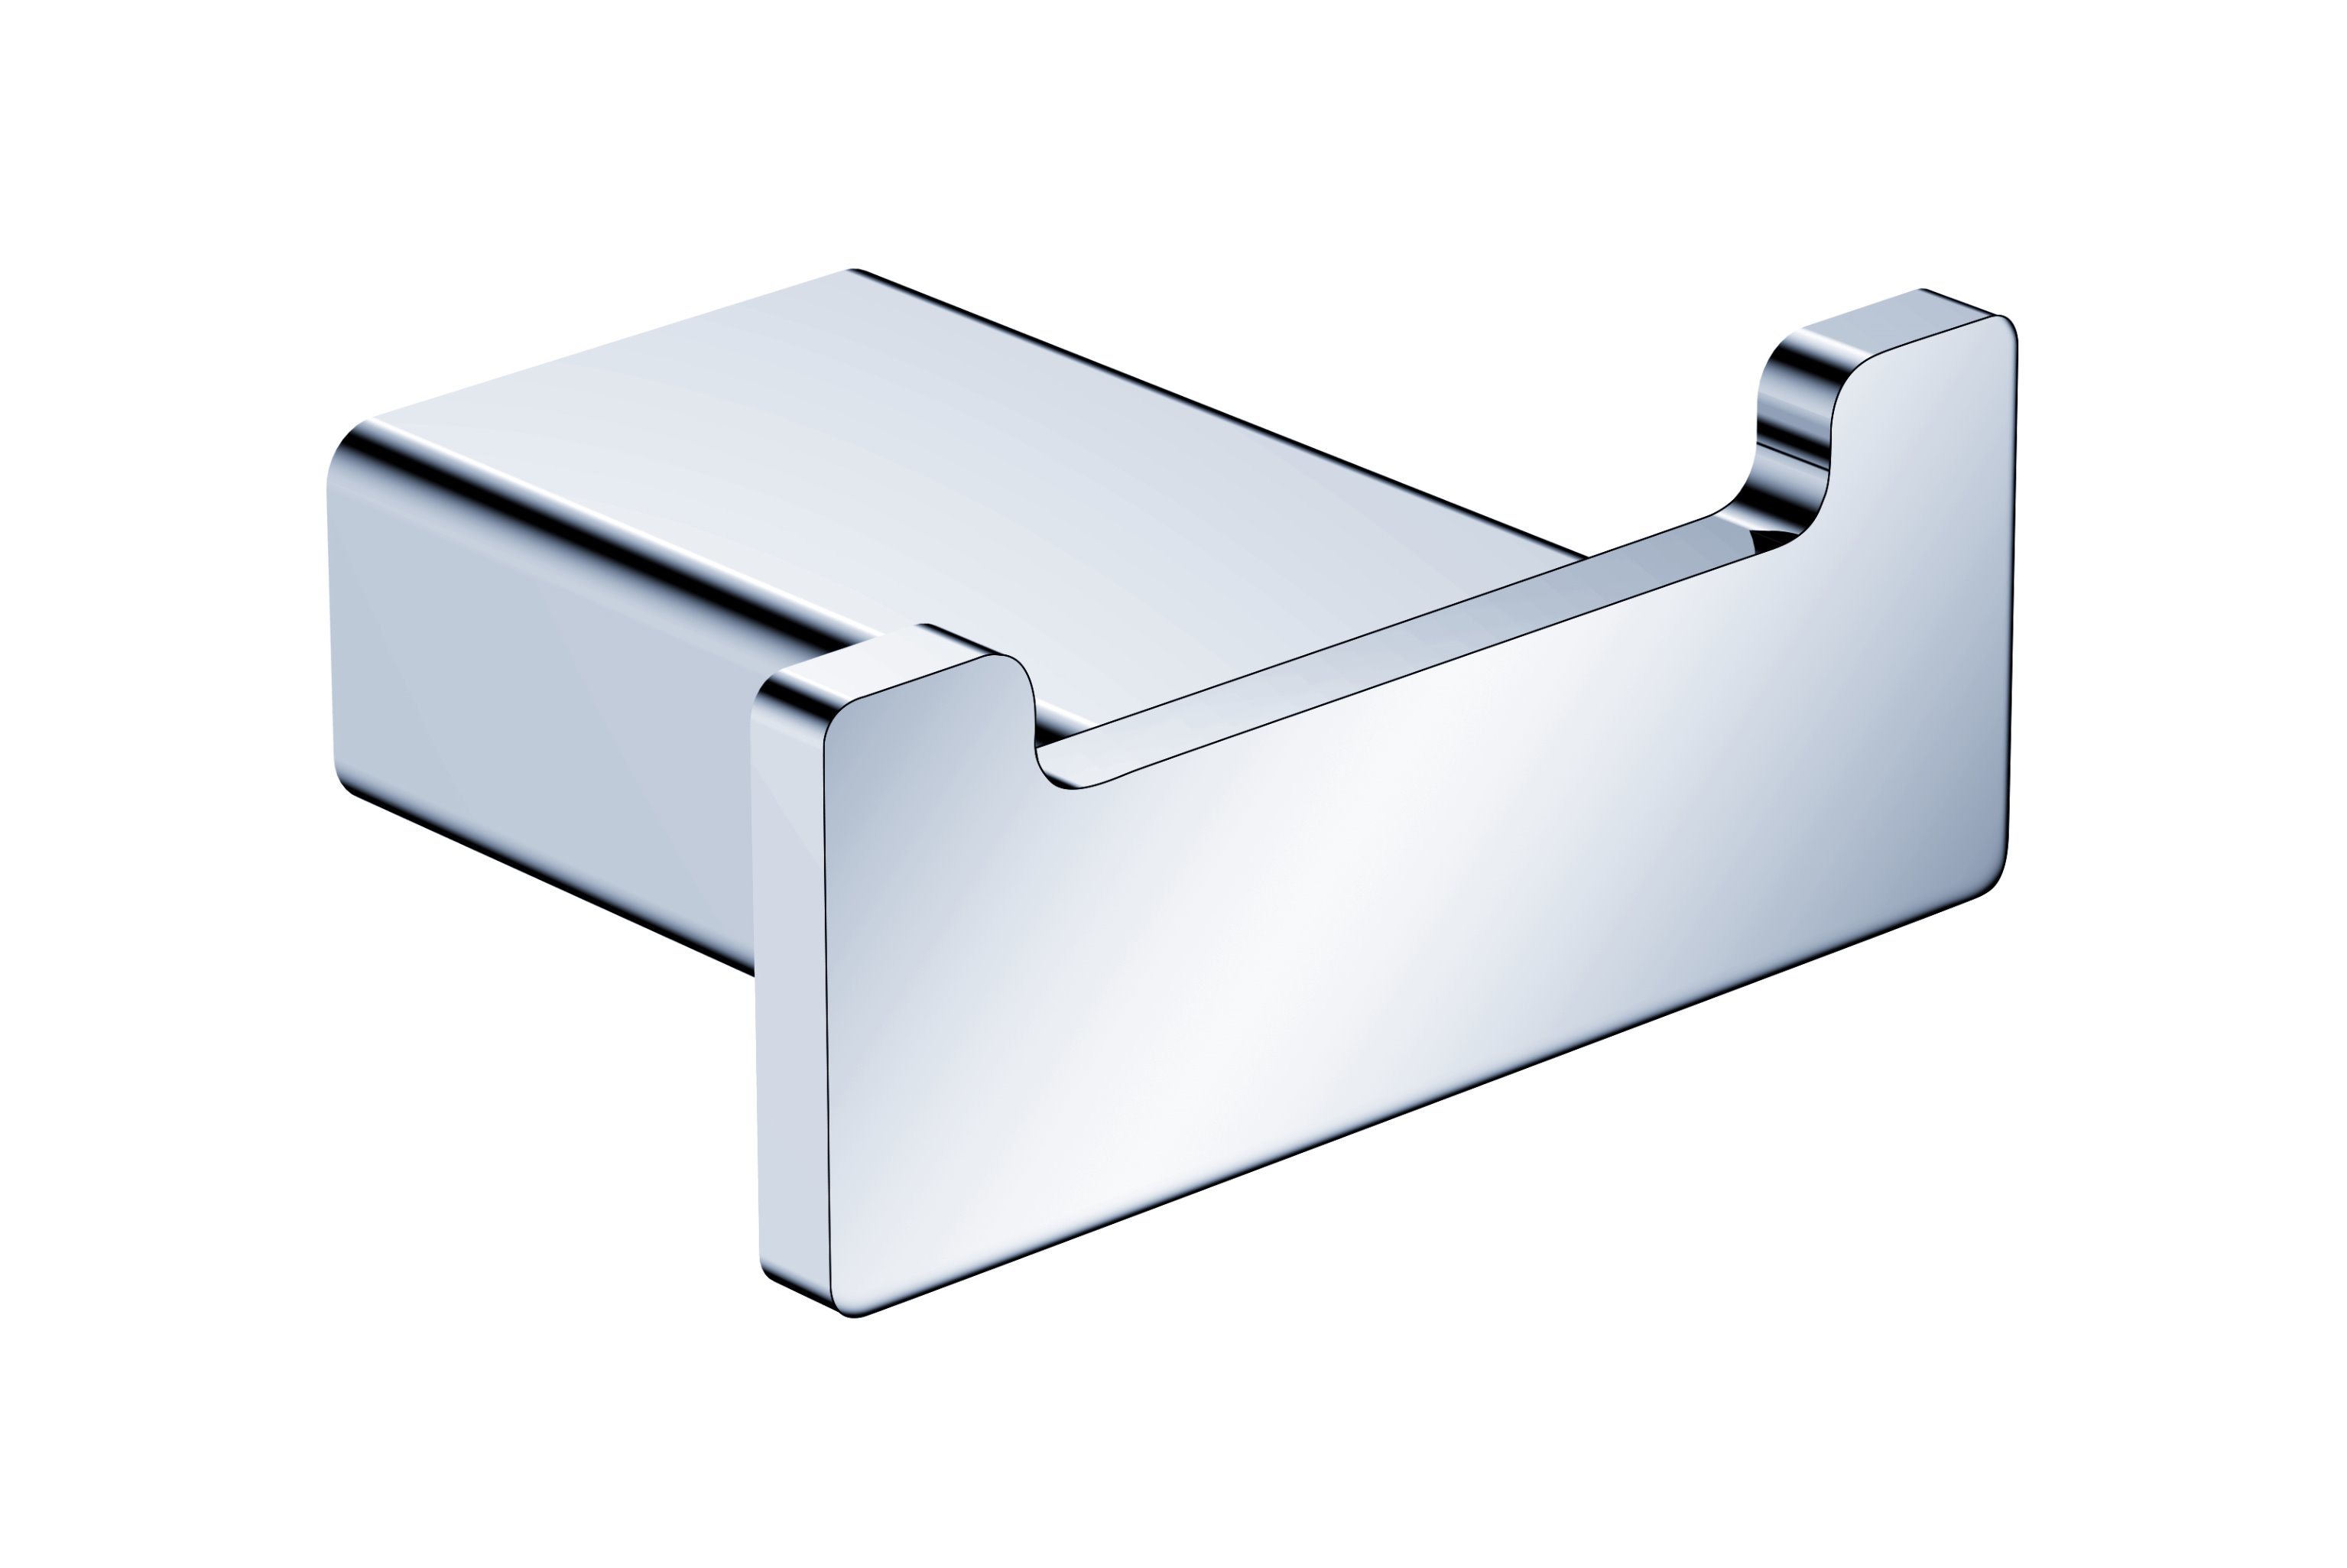 /proimages/2f0j00PwvQlaWqCObu/bathroom-double-coat-and-robe-hook-wall-mount-brushed-stainless-steel.jpg